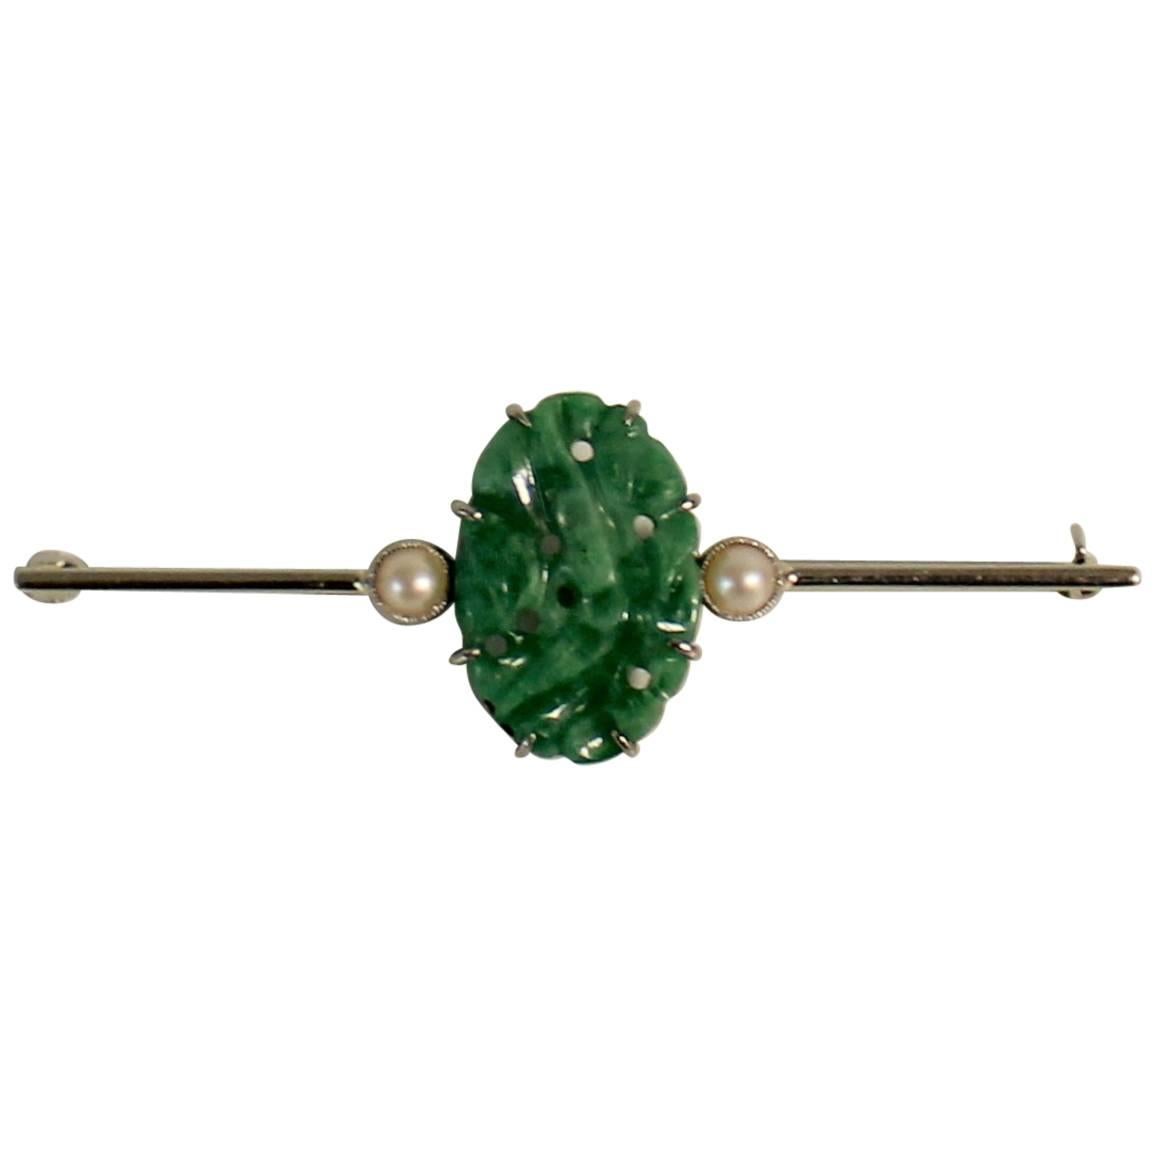 18-Karat White Gold and Jade Brooch with Pearls